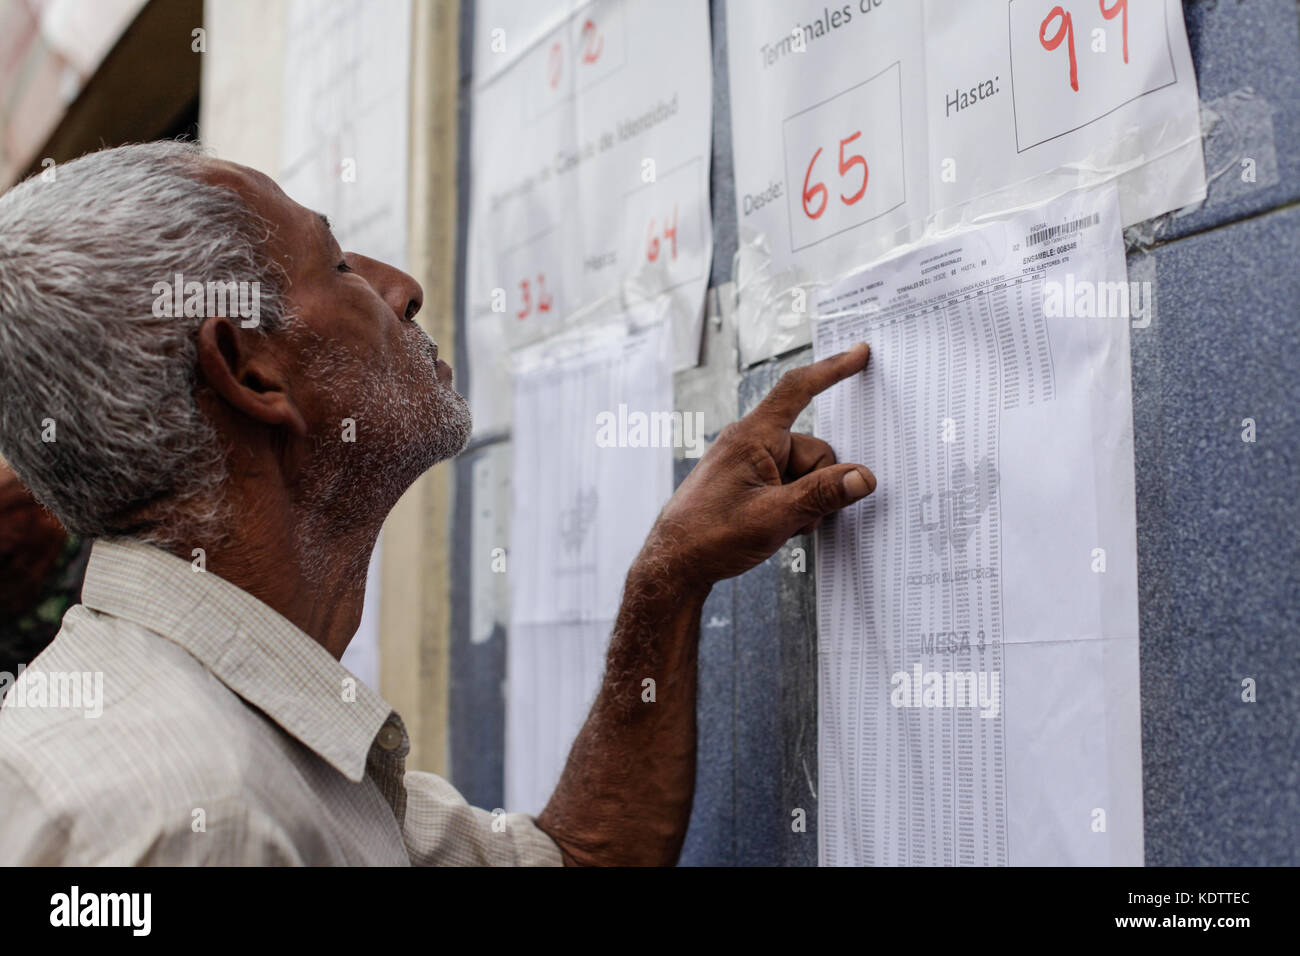 Miranda, Venezuela. 15th Oct, 2017. A man reviews listings at a polling station in Miranda state, Venezuela, on Oct. 15, 2017. On Sunday, over 18 million Venezuelans are eligible to vote for 197 candidates running for the country's 23 governor posts. Credit: Boris Vergara/Xinhua/Alamy Live News Stock Photo